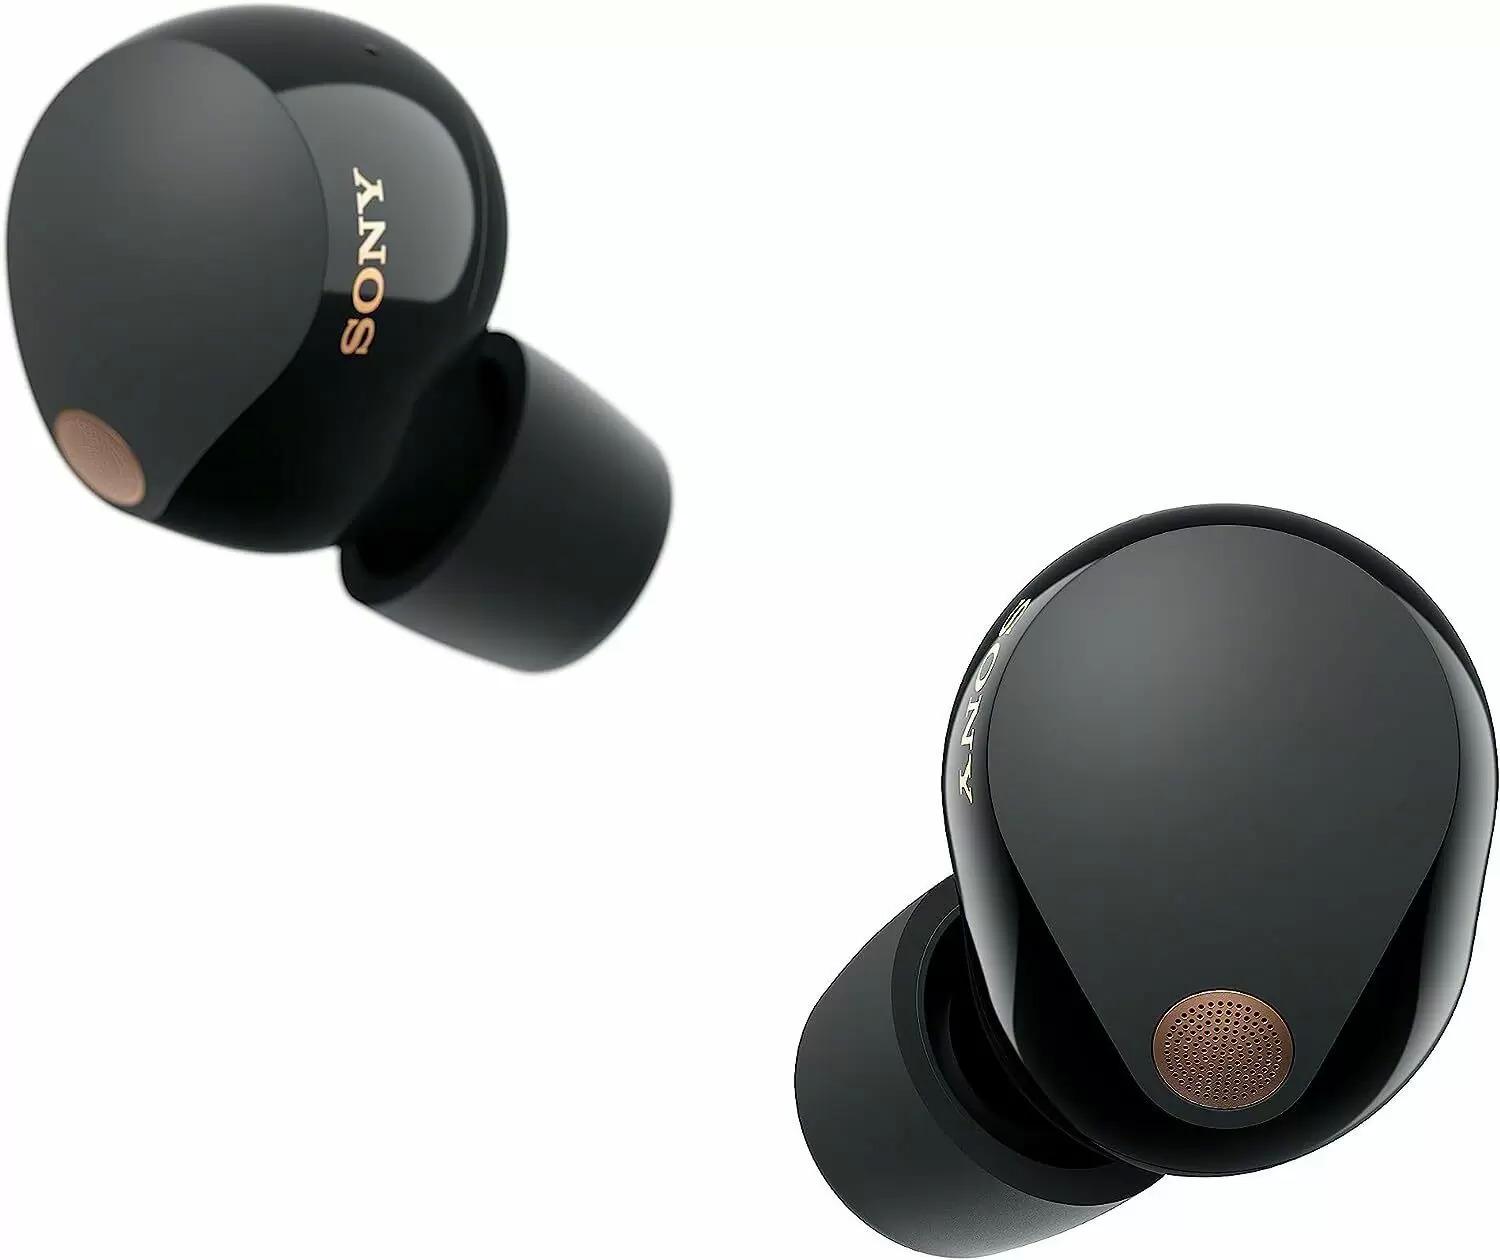 Sony WF-1000XM5 Noise Canceling Truly Wireless Bluetooth Earbuds for $149.99 Shipped